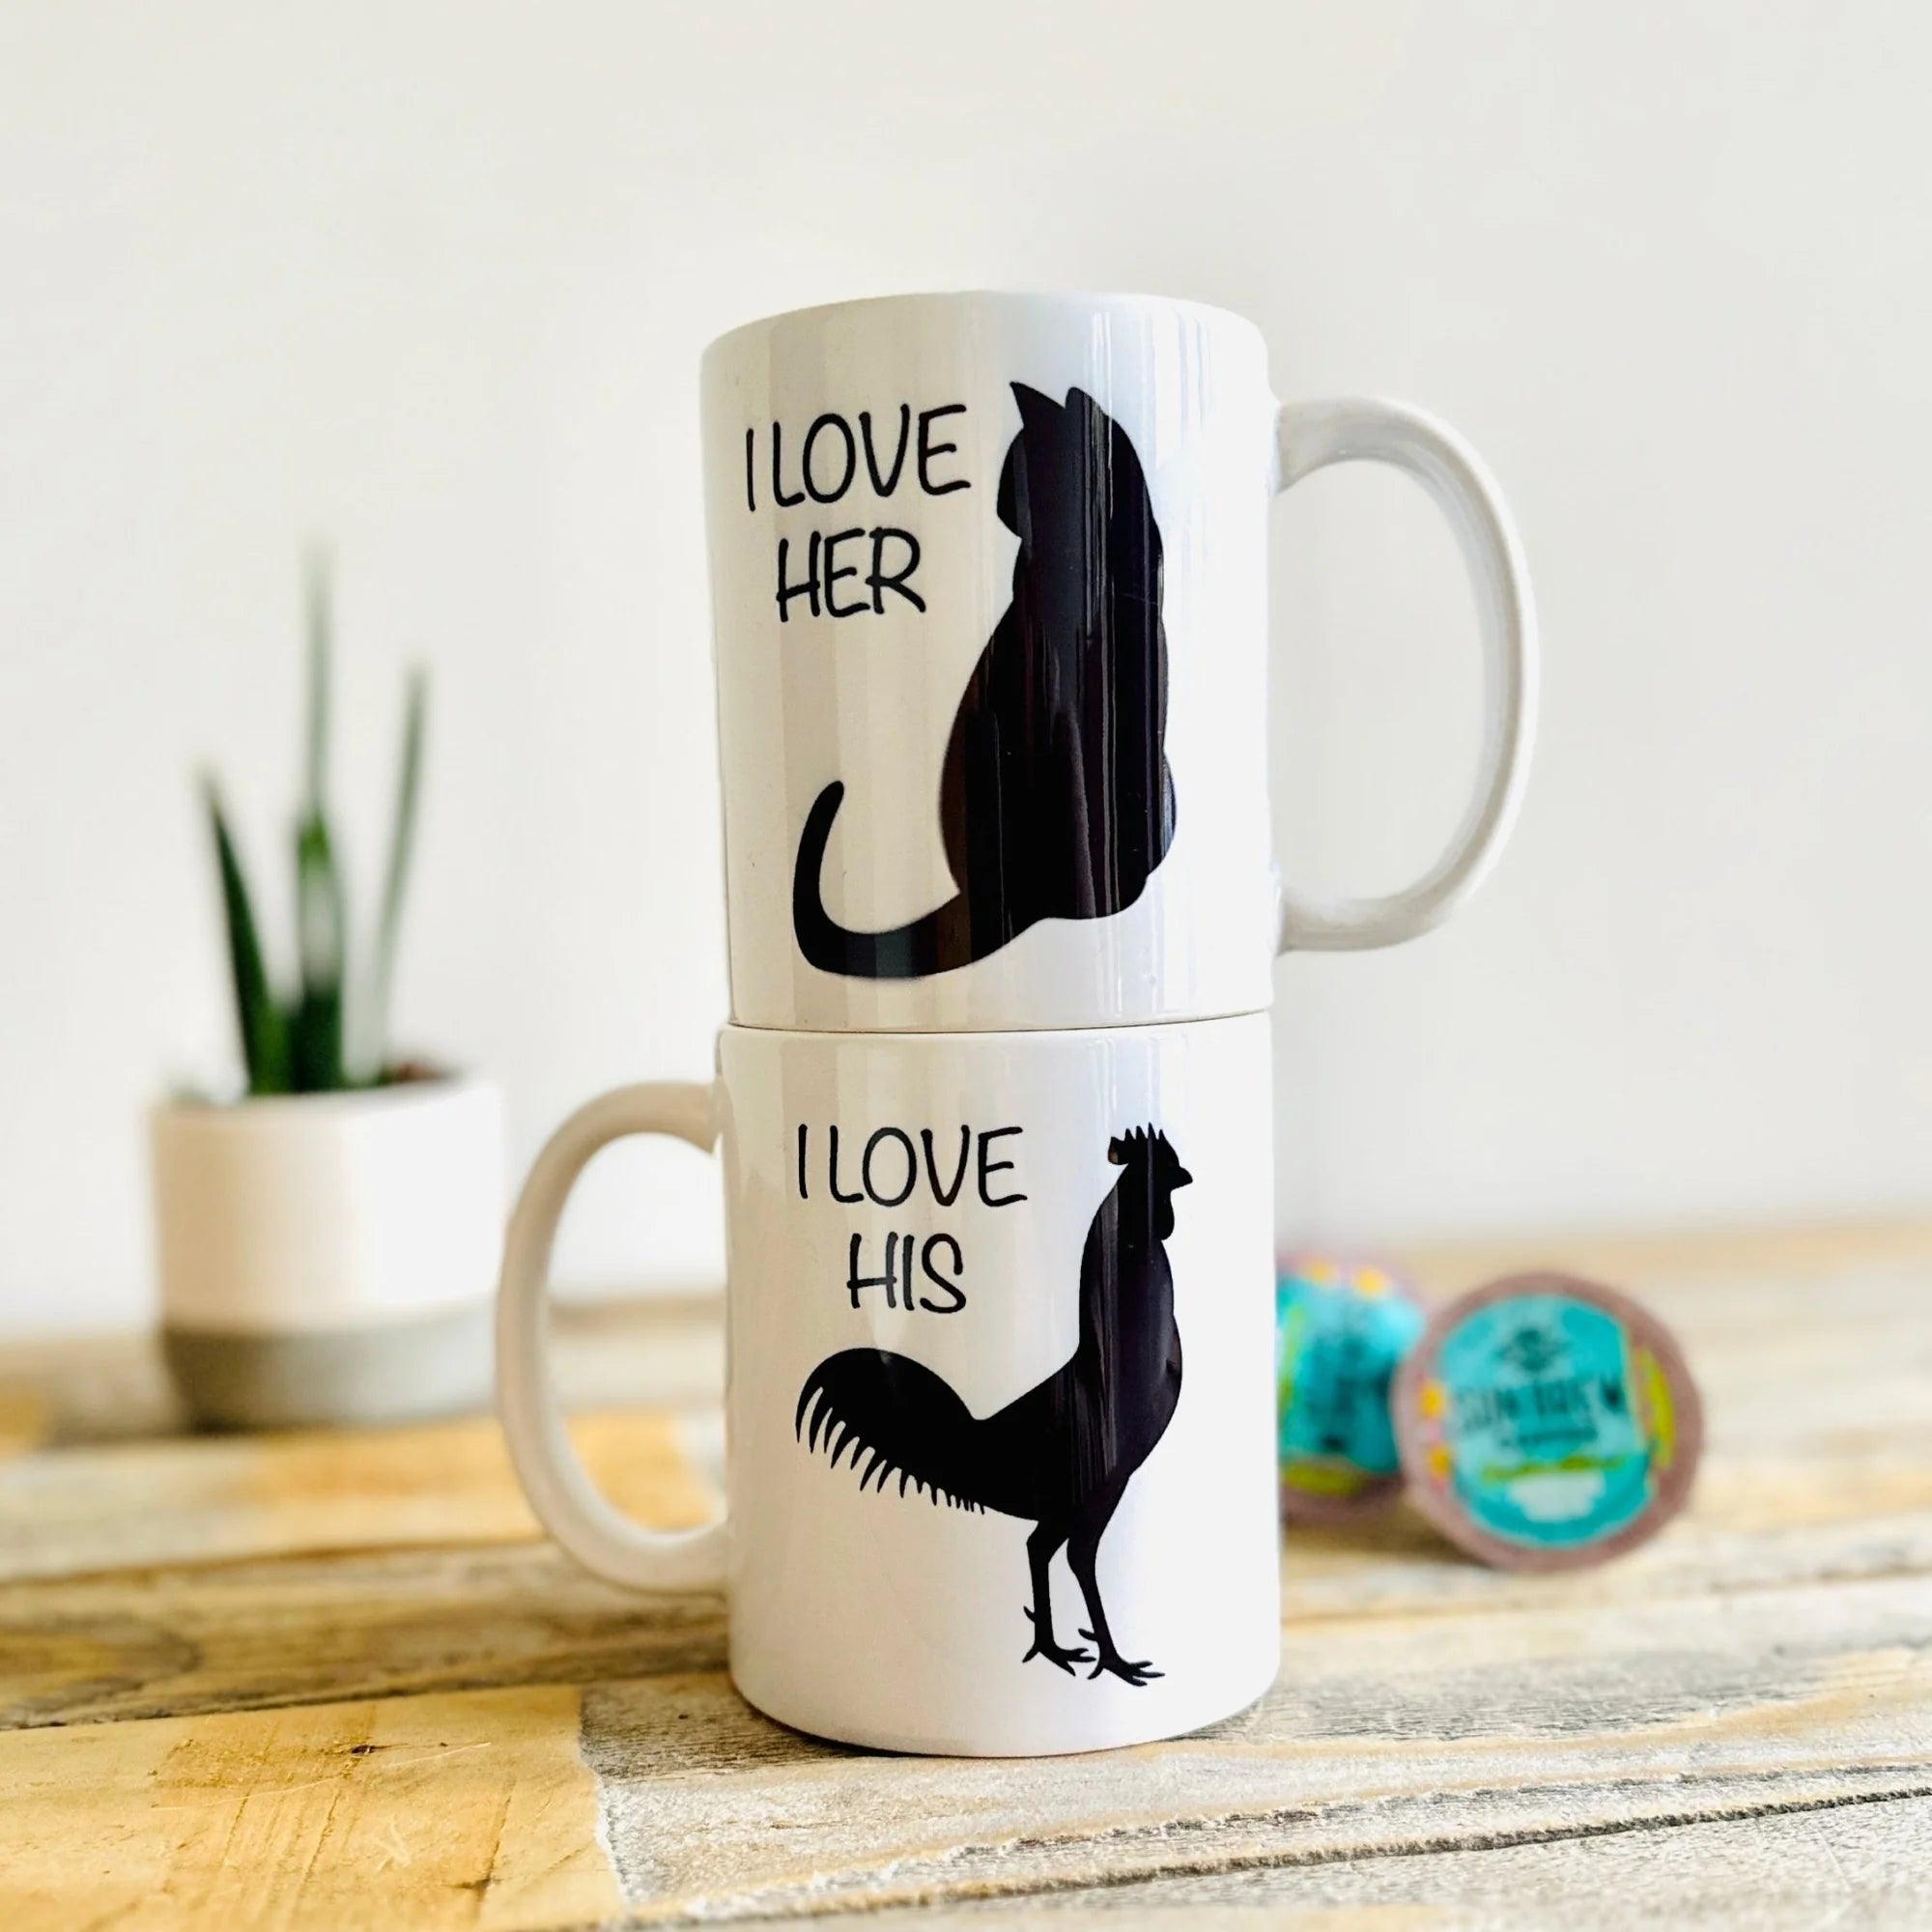 27 Funny Coffee Mugs to Jazz Up Your Mornings in 2023 - Groovy Girl Gifts